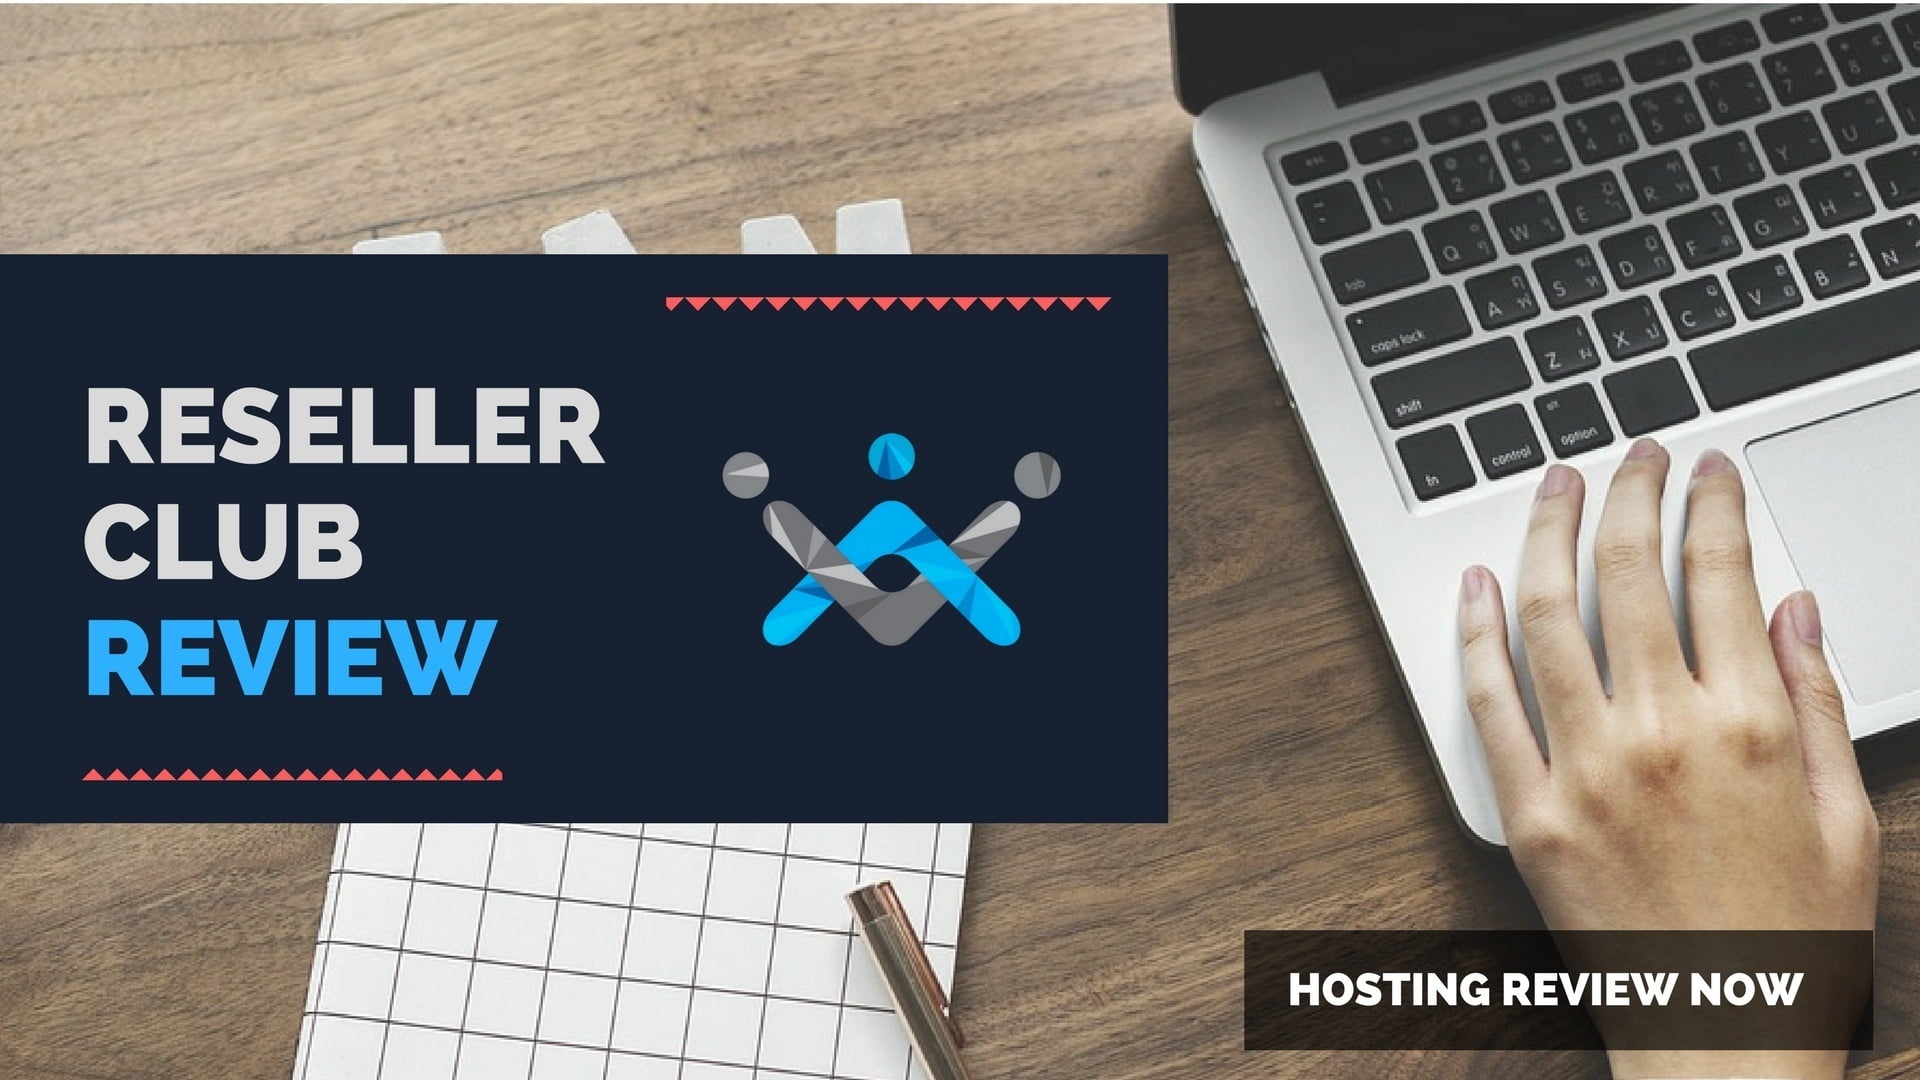 Reseller club Review 2018